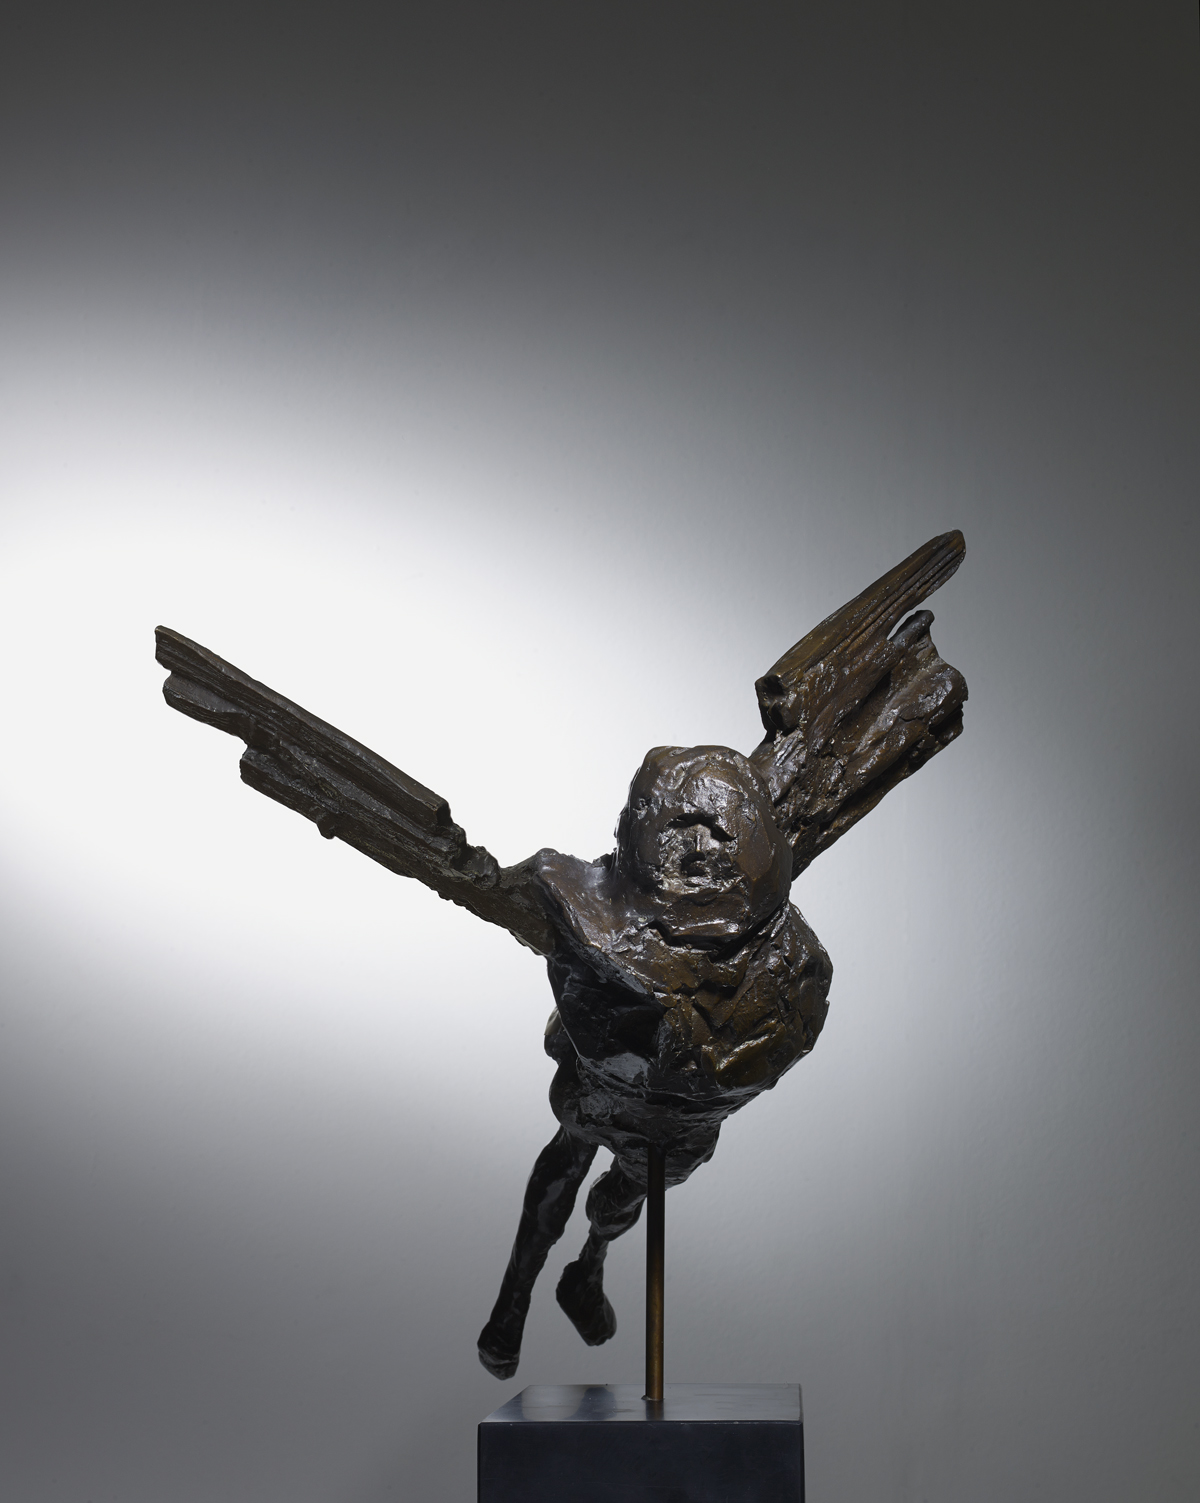 Maquette for the Alcock and Brown Memorial (Horizontal Birdman) (1962), Bronze, Edition 7 of 9, H35.5 x W40.5cm